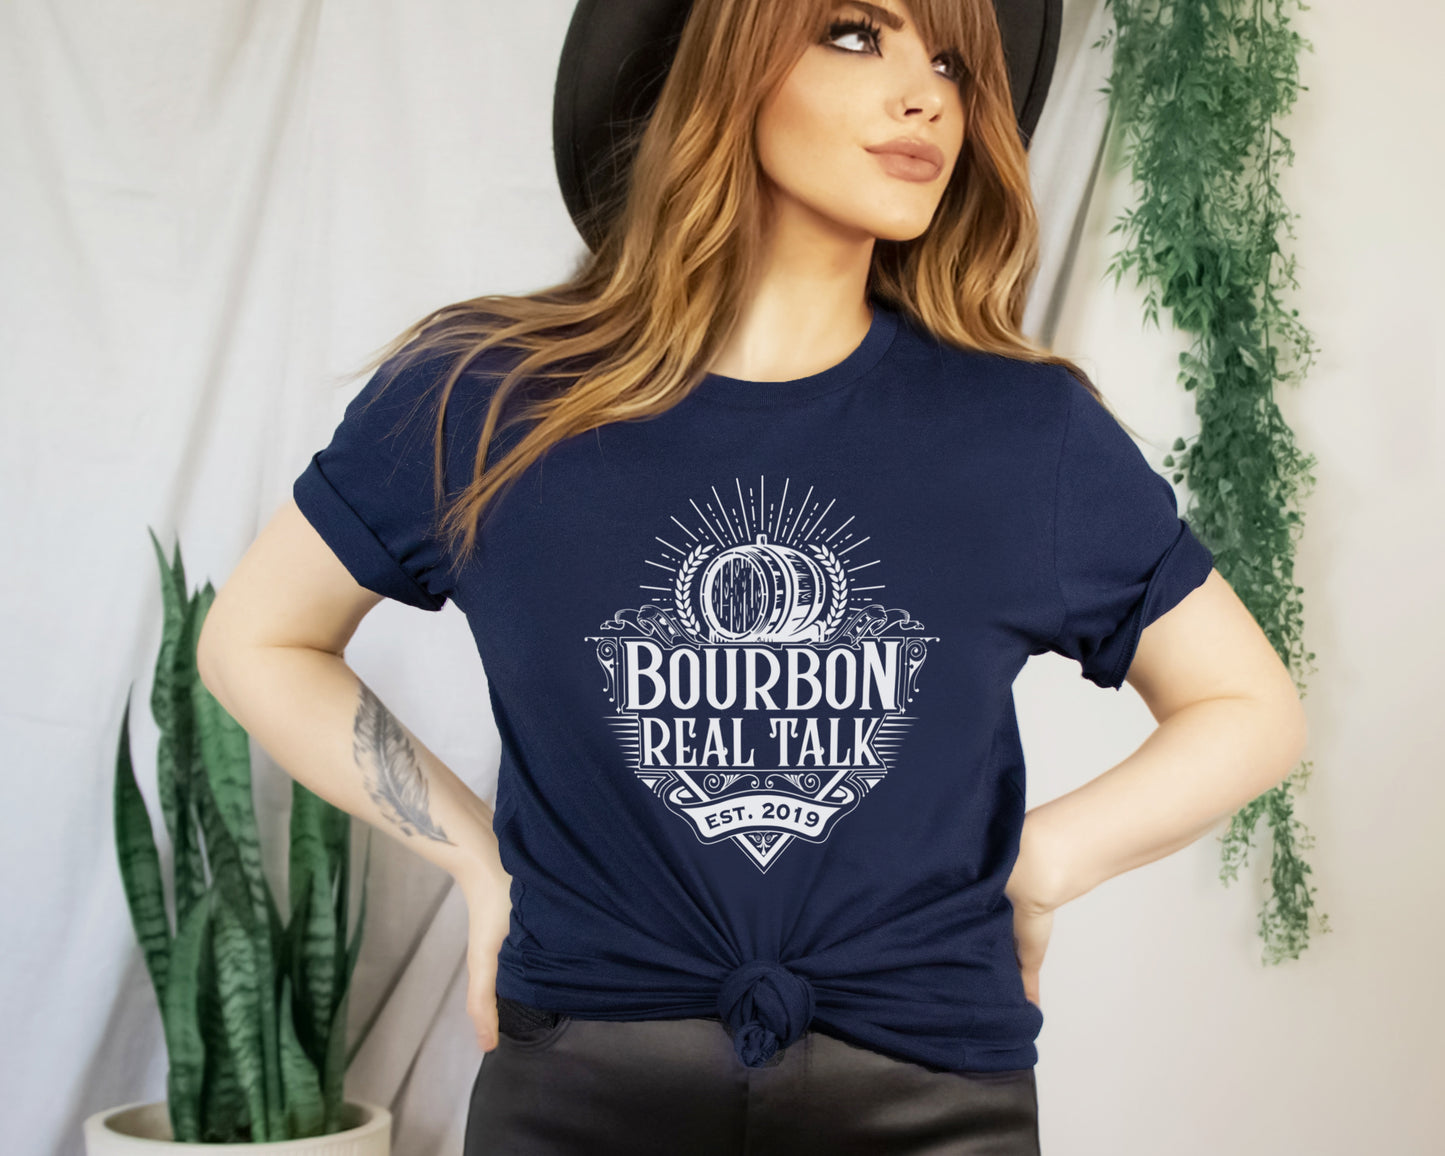 woman with red hair, black hat, black leather pants and a navy Bourbon Real Talk shirt, tied in the front